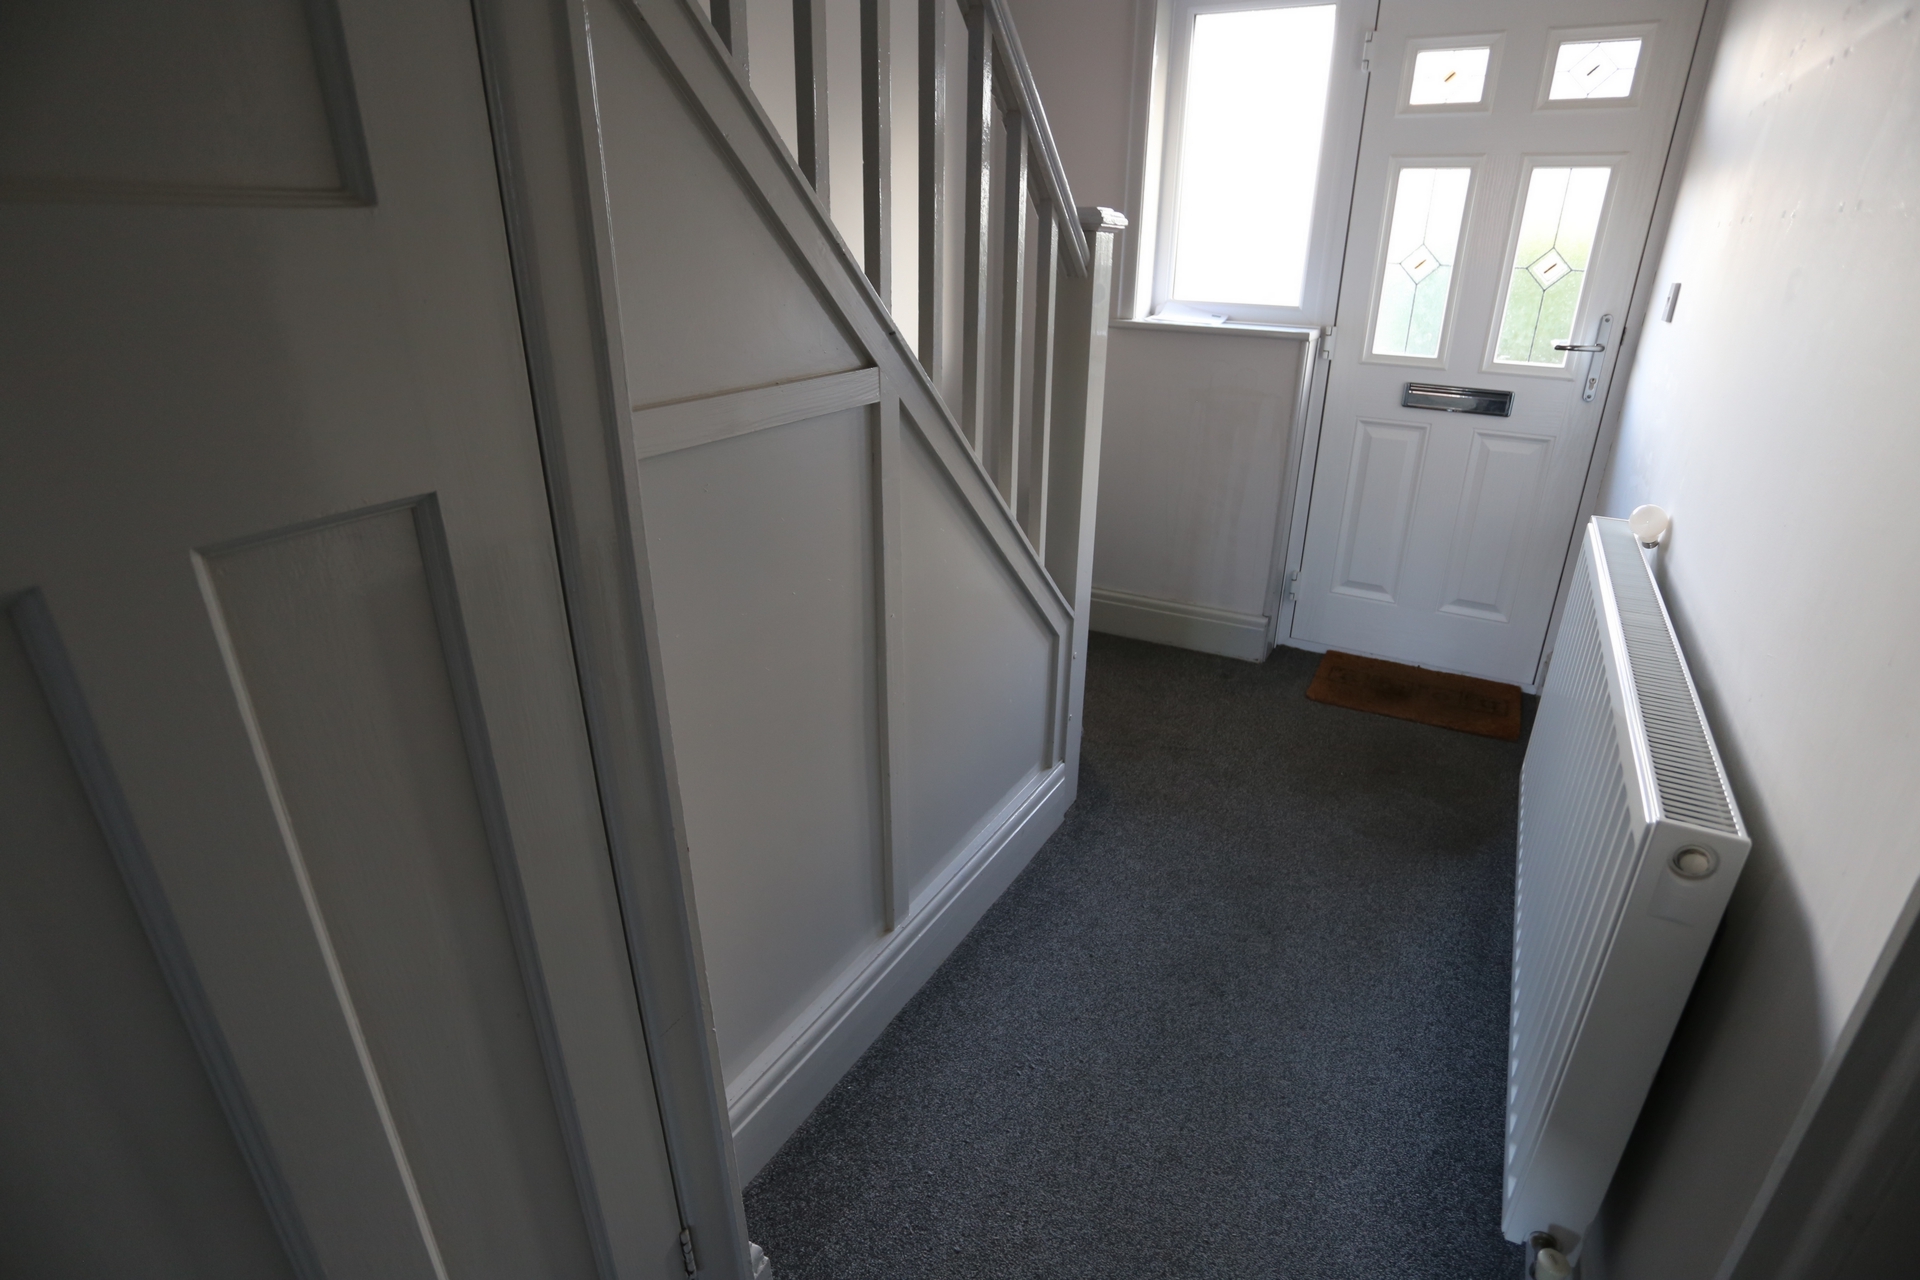 3 bedrooms semi detached, 7 Courtway Drive Sneyd Green Stoke on Trent Staffordshire